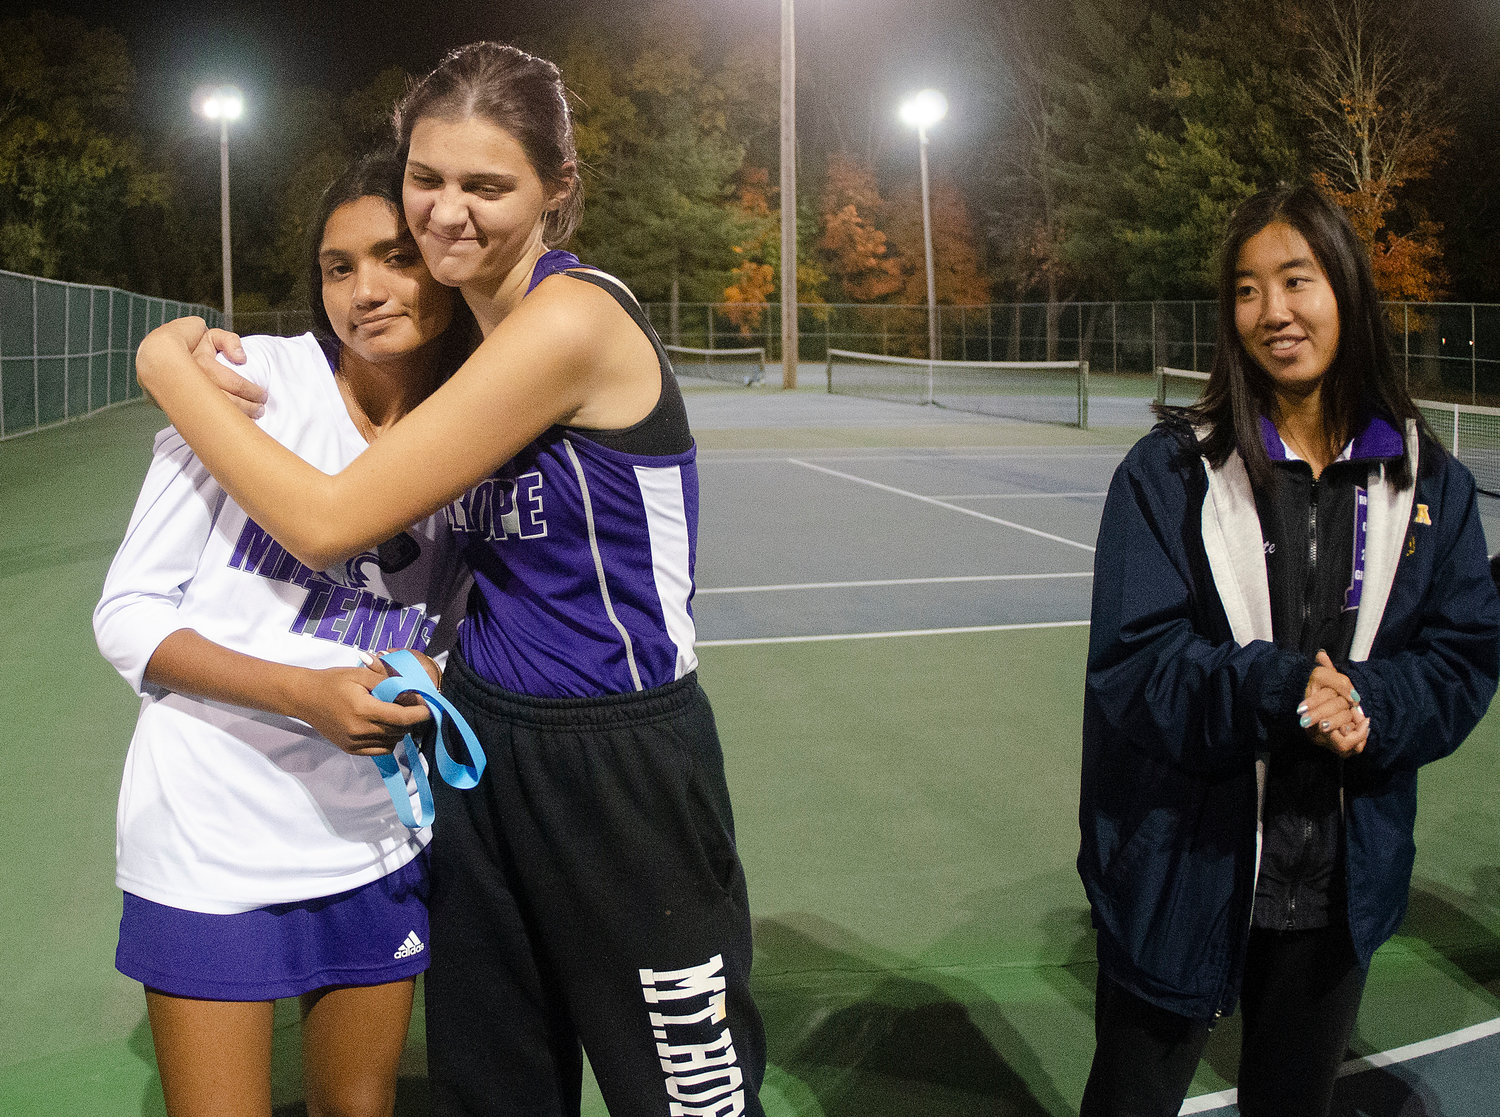 Aditi Mehta (left) gets a hug from her doubles partner, Emily Marino as Eva White looks on after the match.